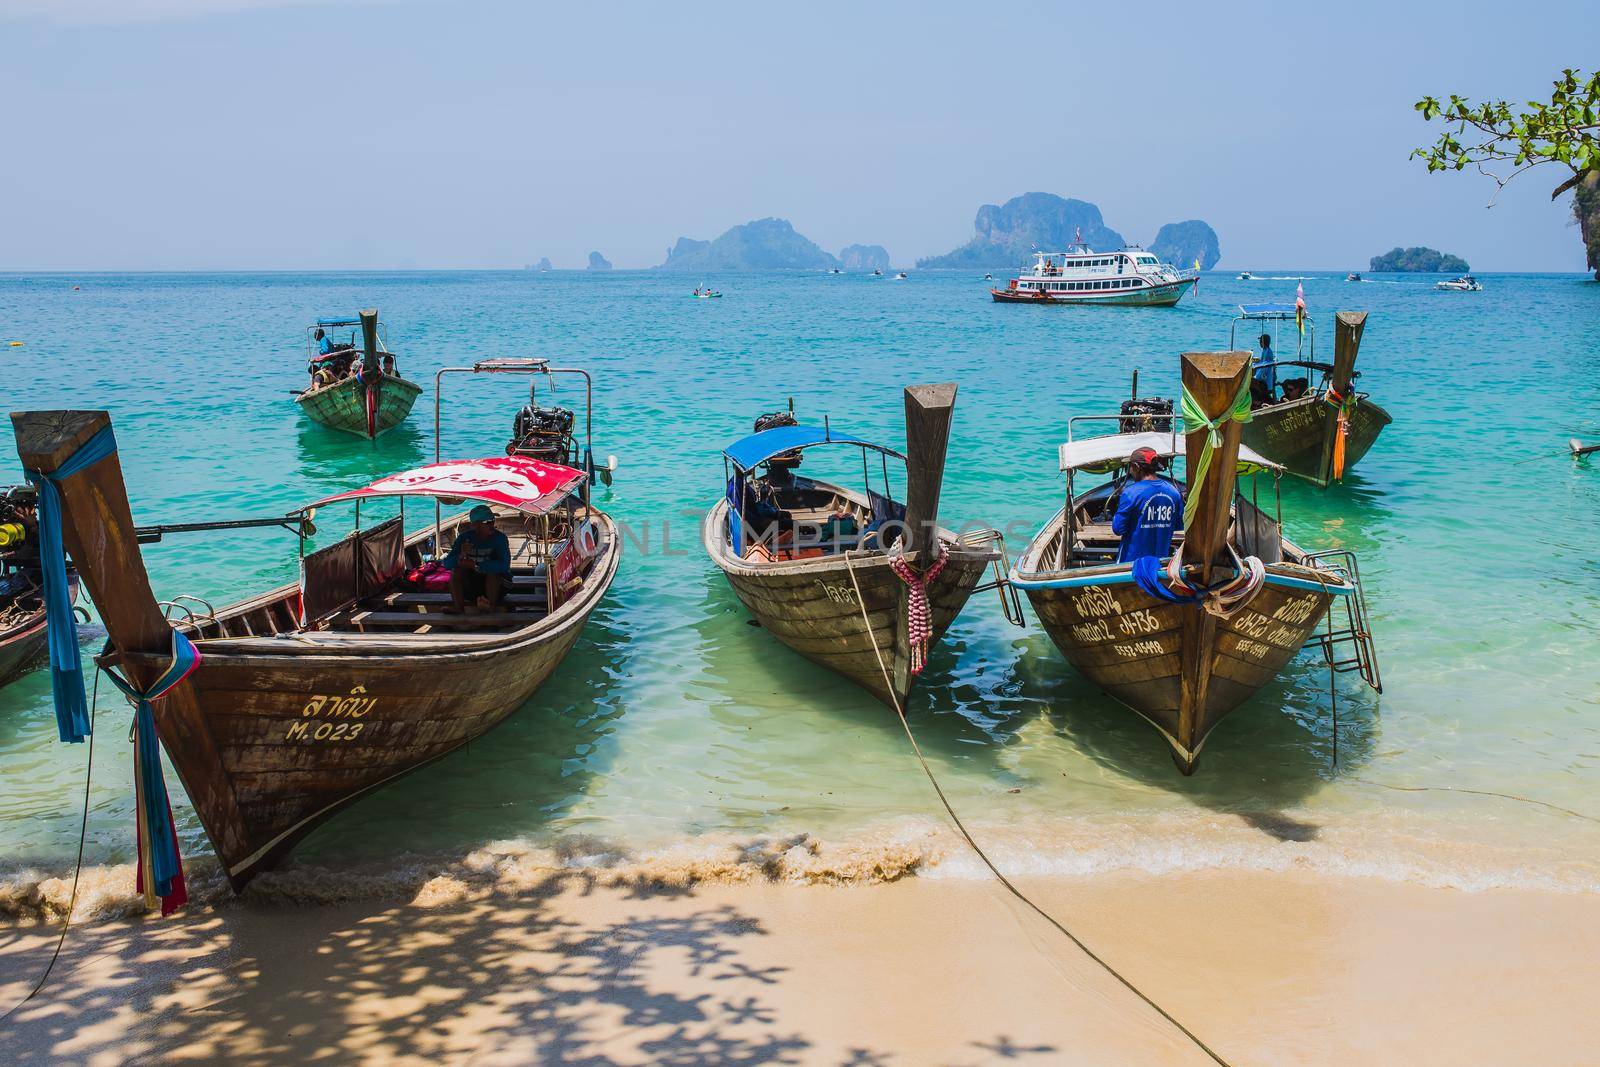 MAYA BAY, THAILAND - APRIL 14, 2014: Dramatic karst geography stands tall above traditional Thai longtail boats docked in the popular Maya Bay. by Wmpix